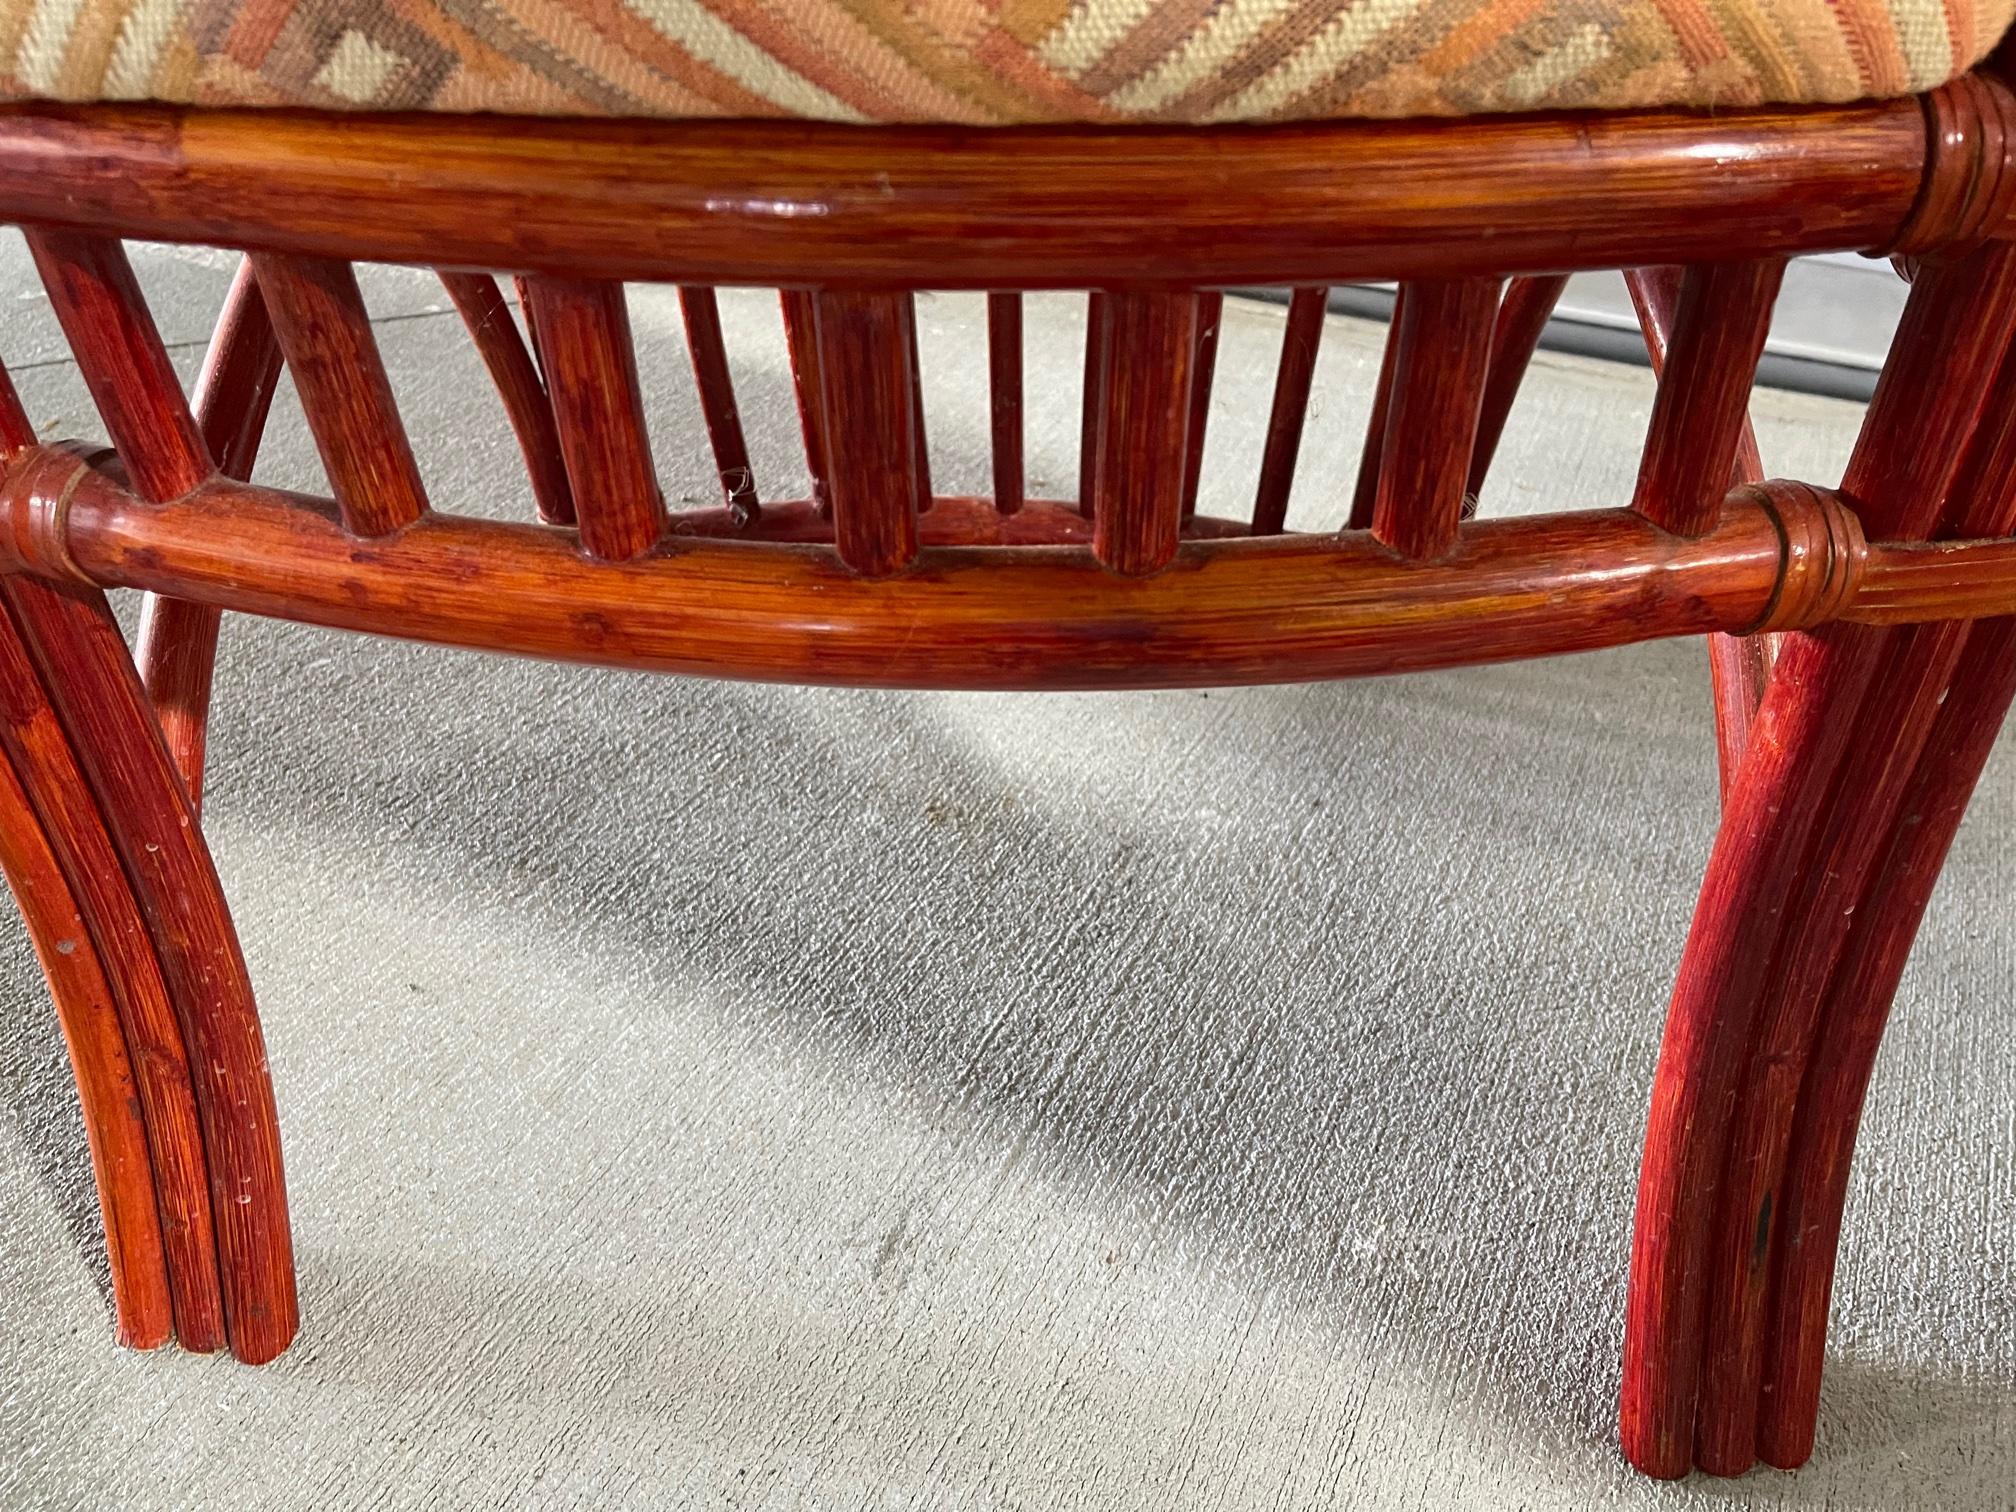 Pair of Chinese Style Red Lacquer Rattan Chairs Attributed to Roche Bobois 3